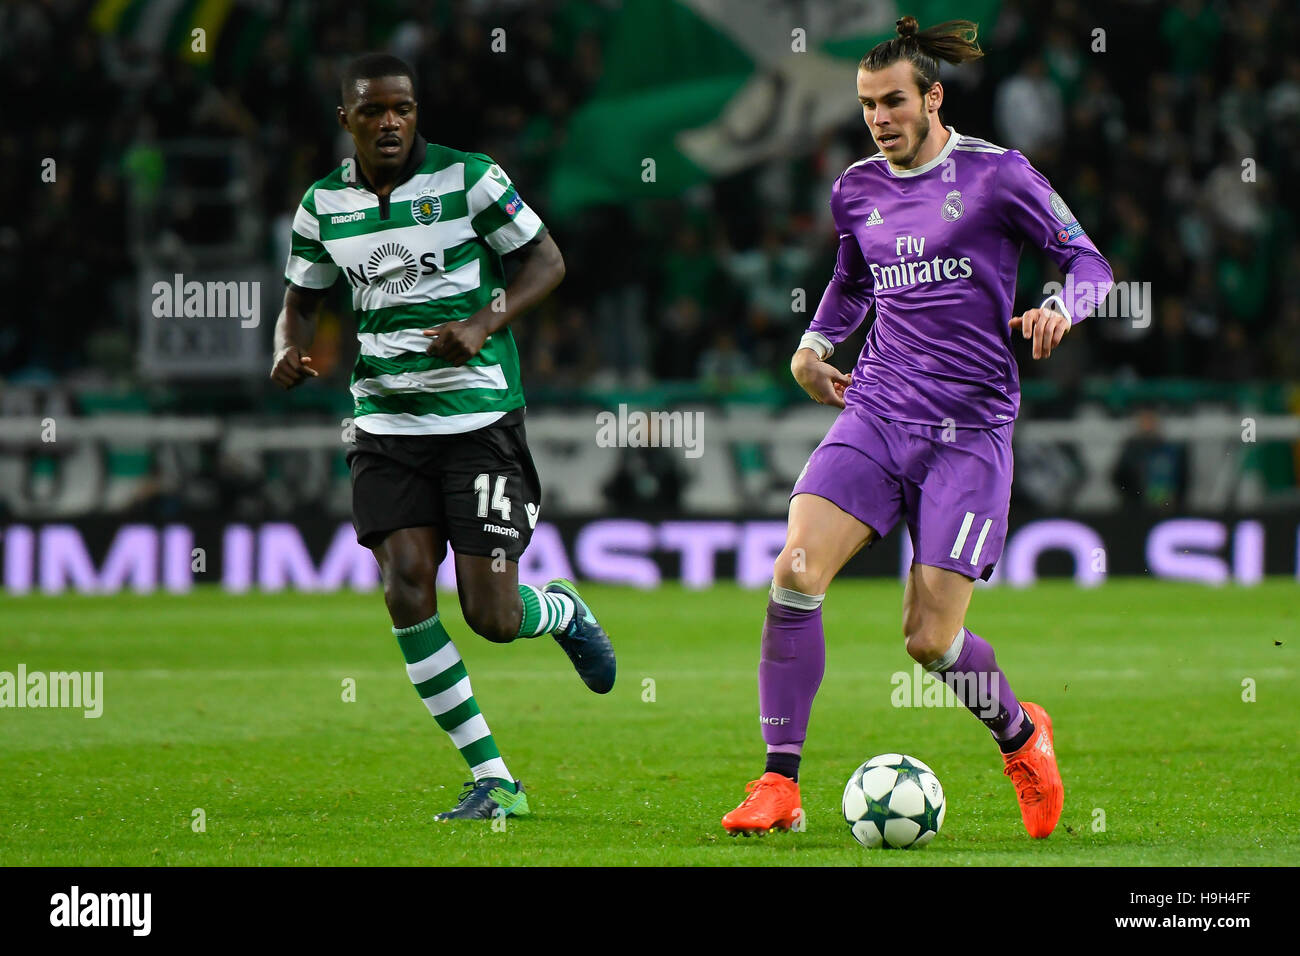 Lisbon, Portugal. 22nd November, 2016. SPORTING-REAL MADRID  - William Carvalho (L) and Bale (R) in action during UEFA Champions League football match between Sporting and Real Madrid, in Lisbon, Portugal. Photo: Bruno de Carvalho/ImagesPic Credit:  imagespic/Alamy Live News Stock Photo